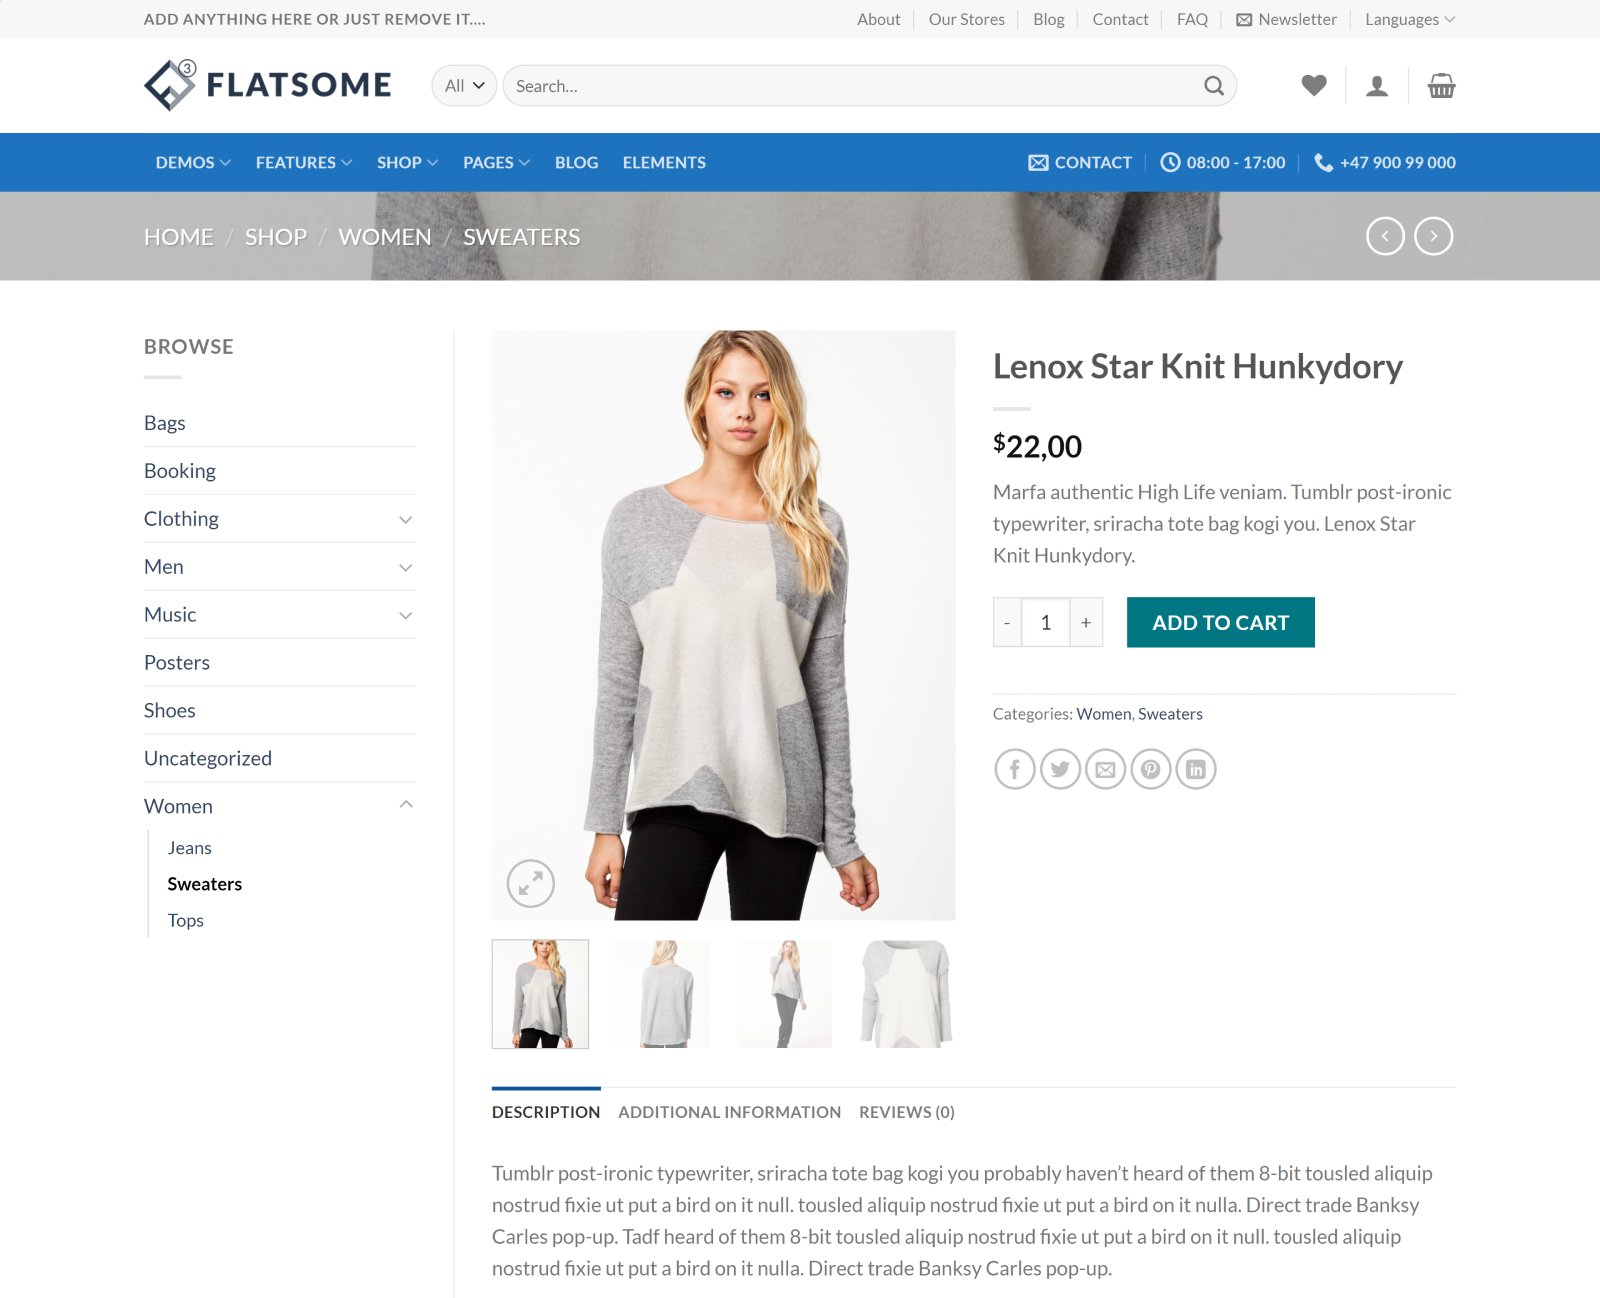 Flatsome Product Page